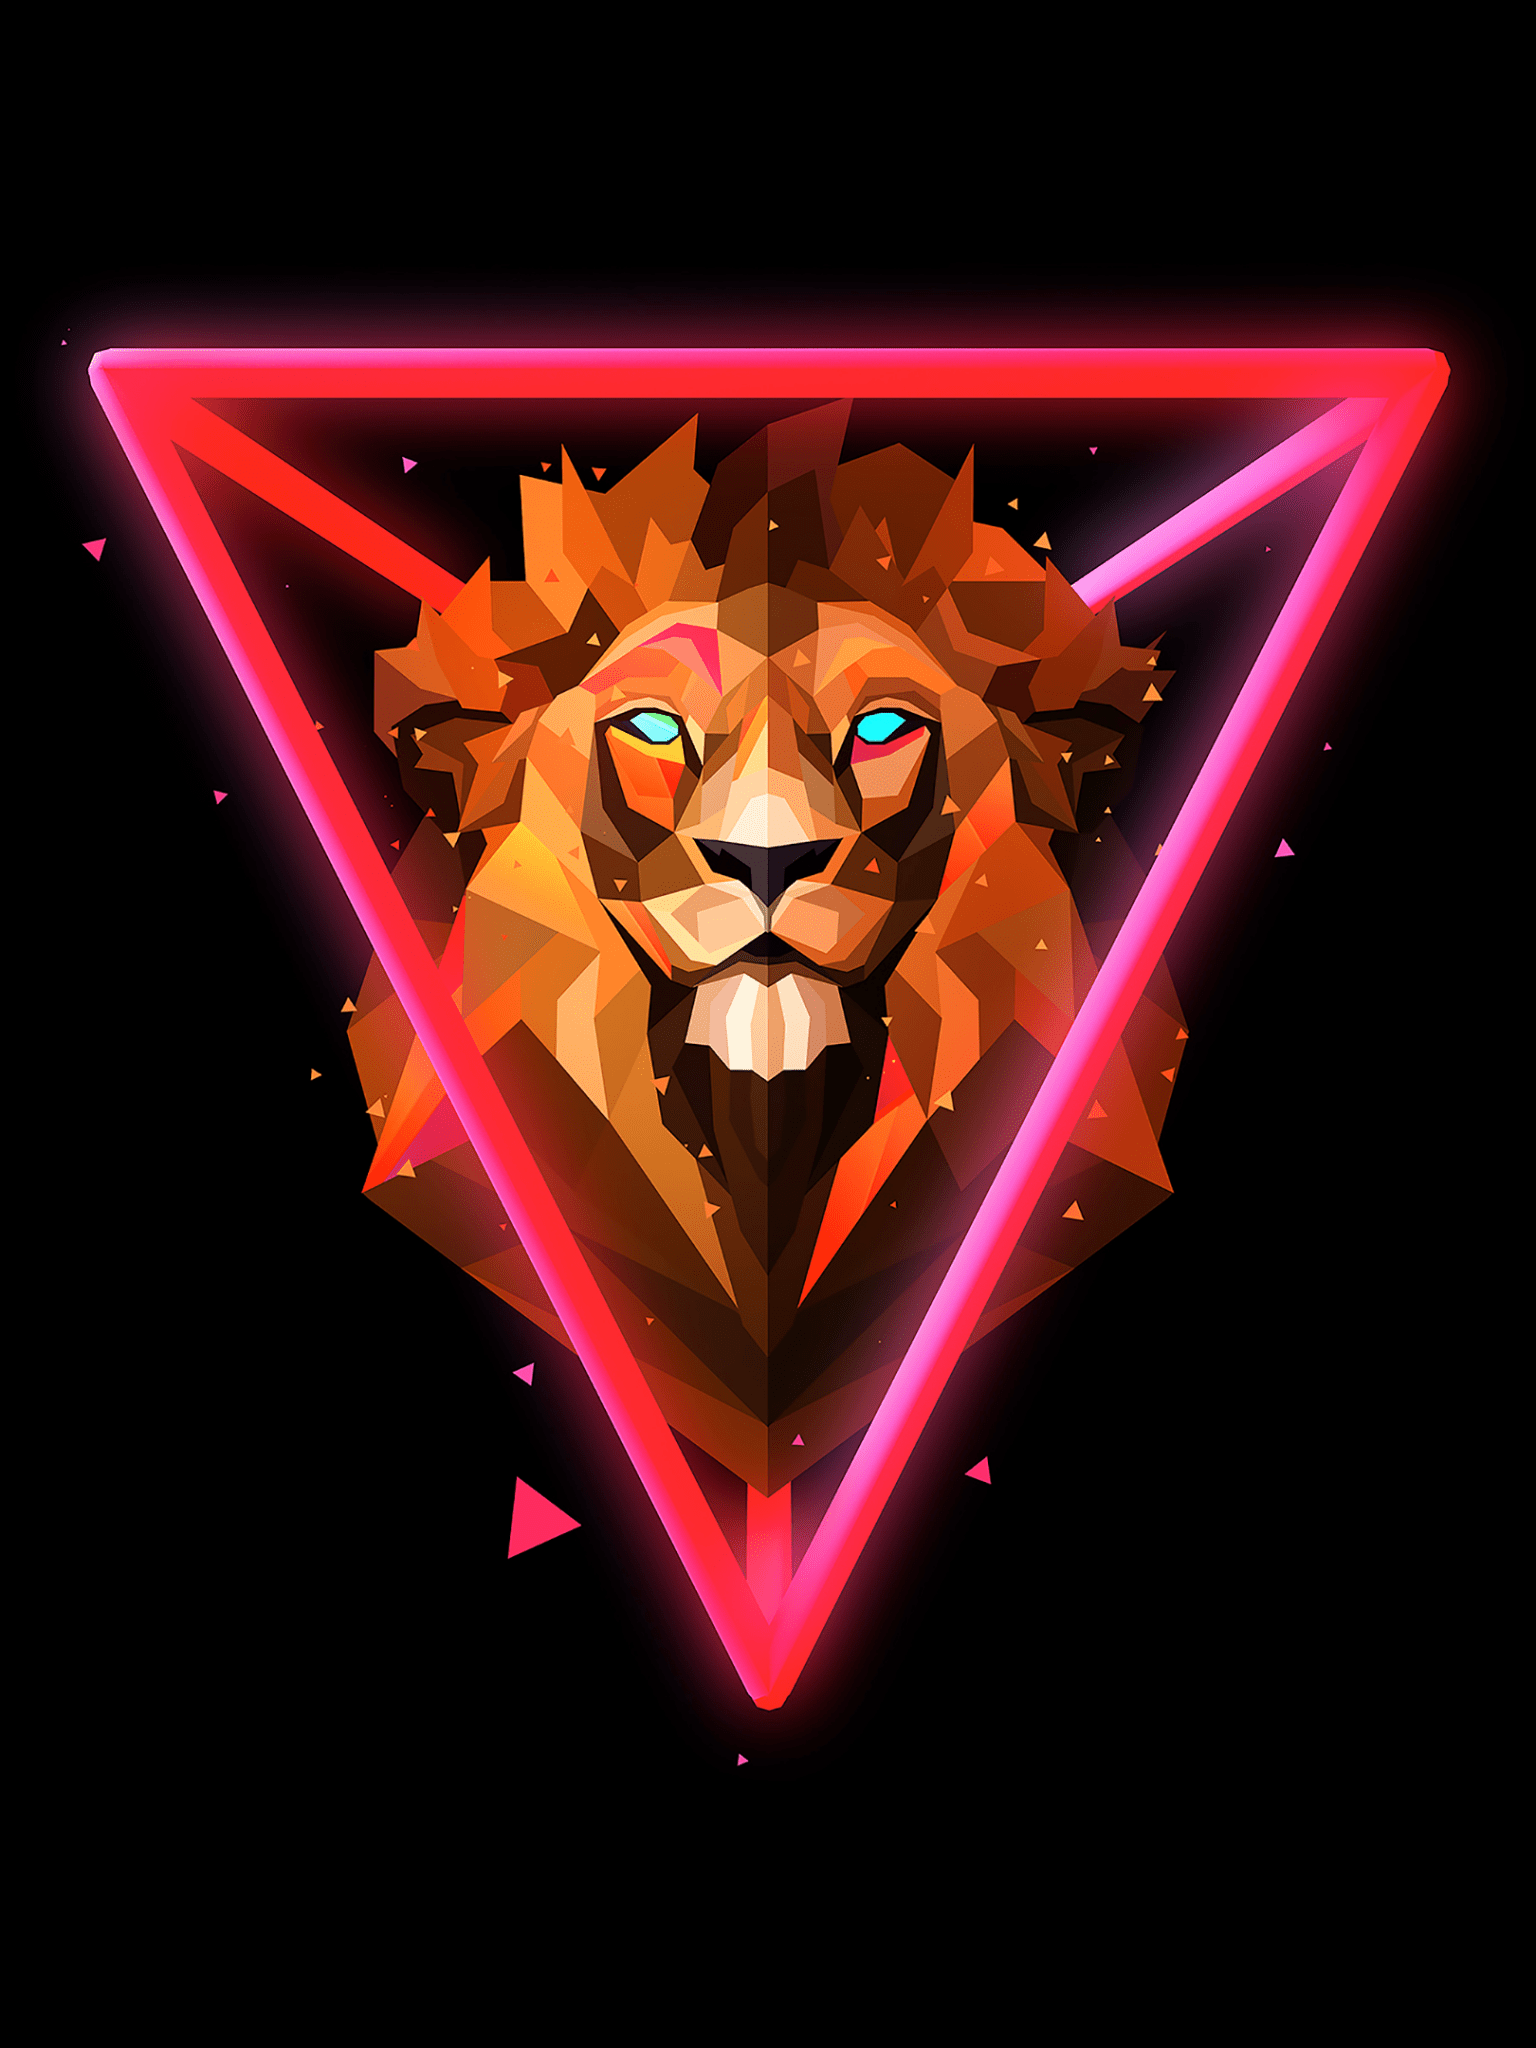 A lion with neon triangles around it - Low poly